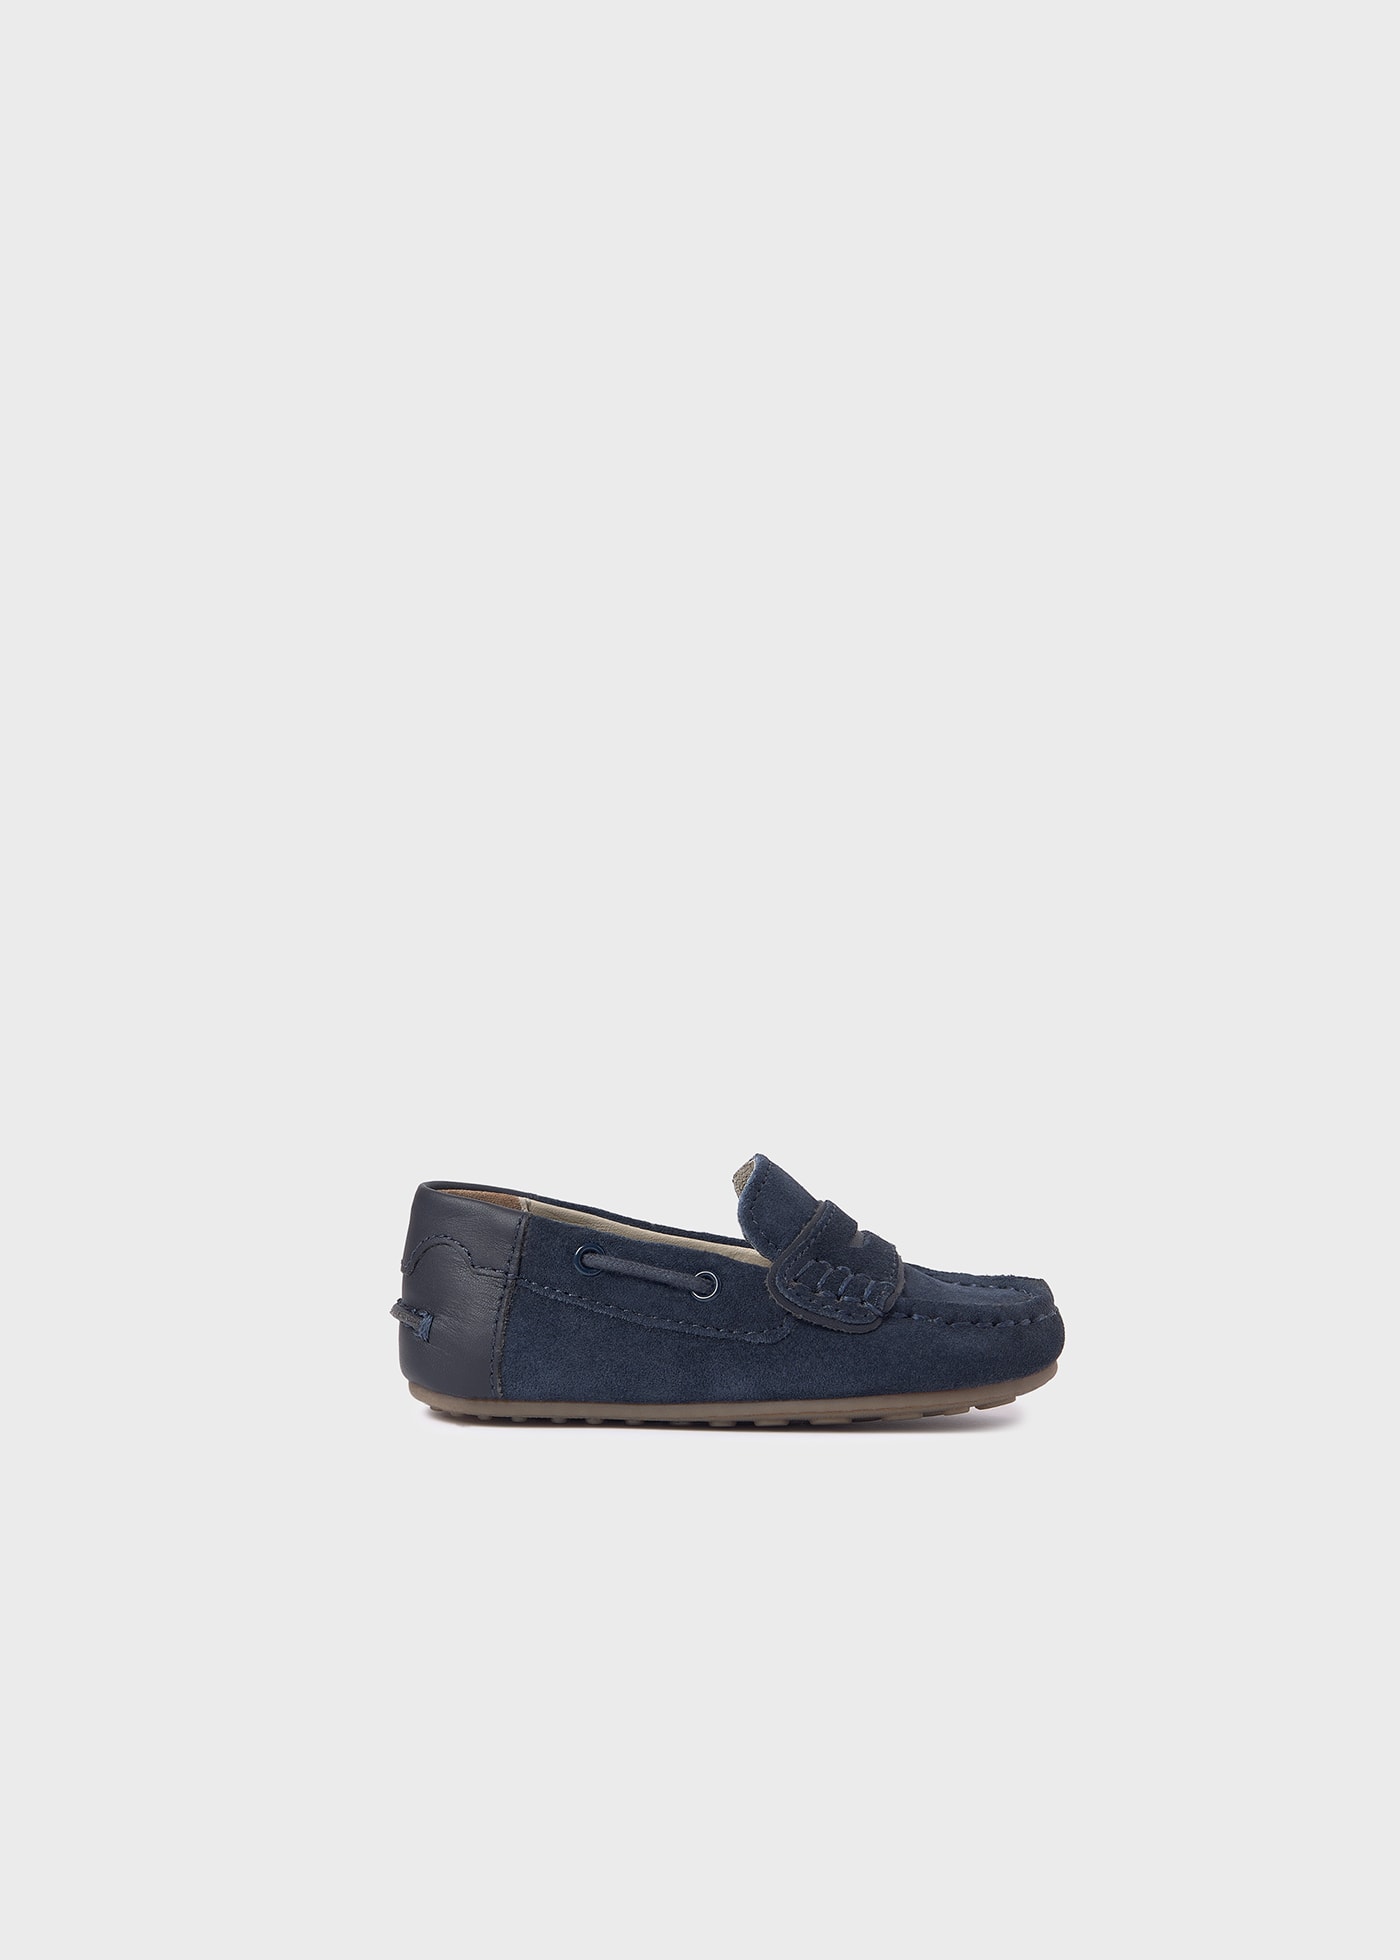 Baby Suede Moccasins